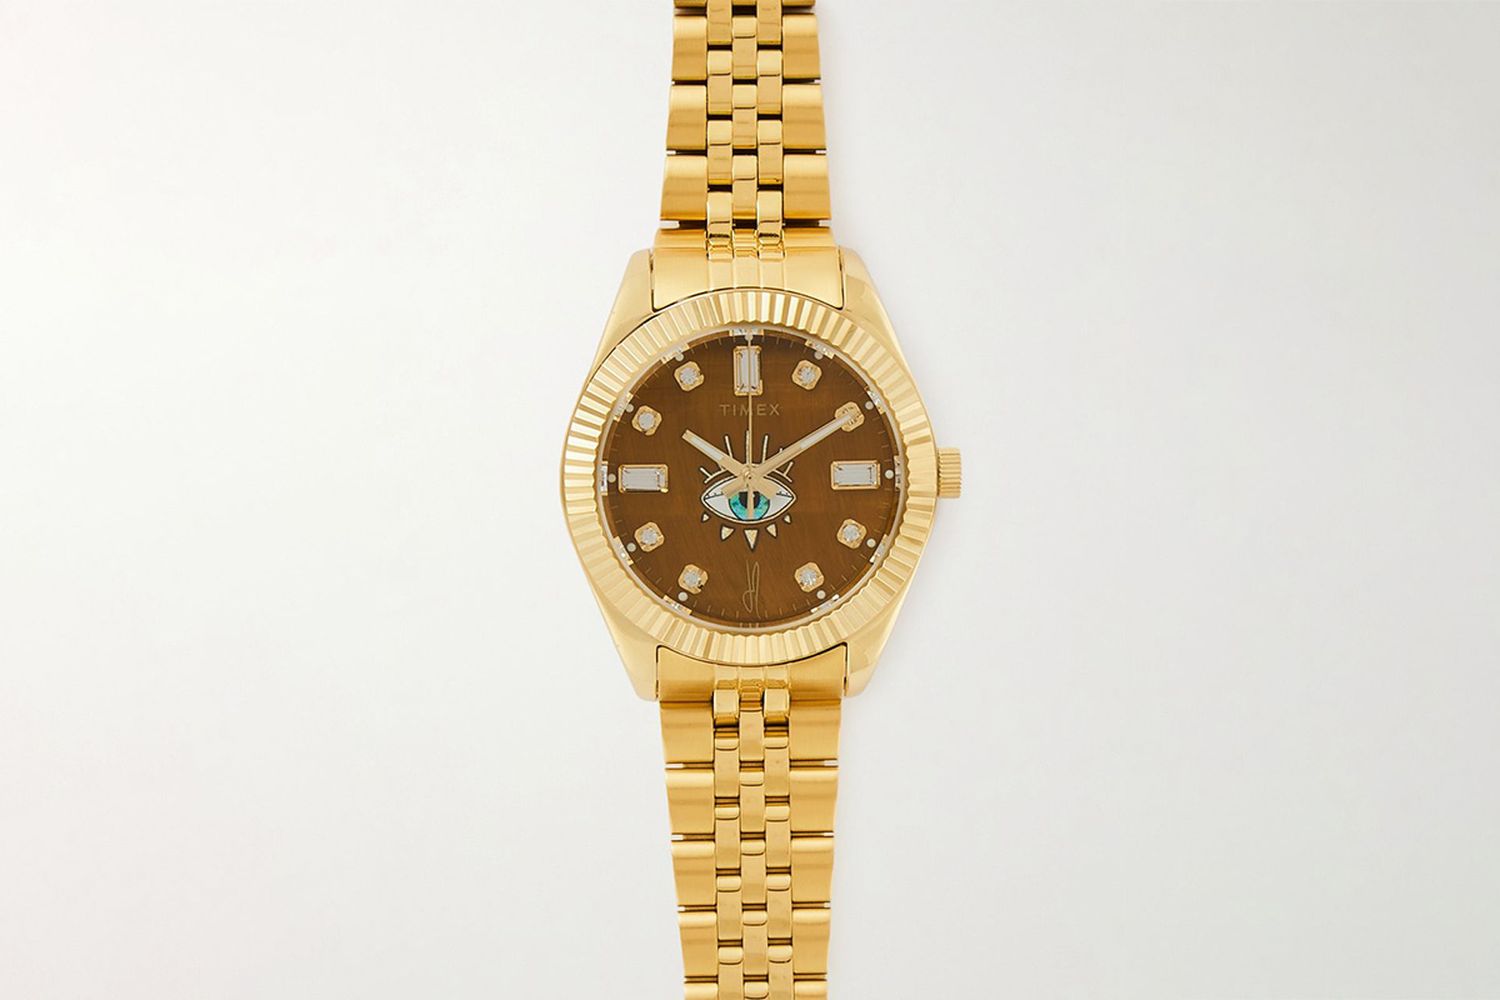 Jacquie Aiche 38mm Gold-Tone Stainless Steel and Tiger's Eye Watch